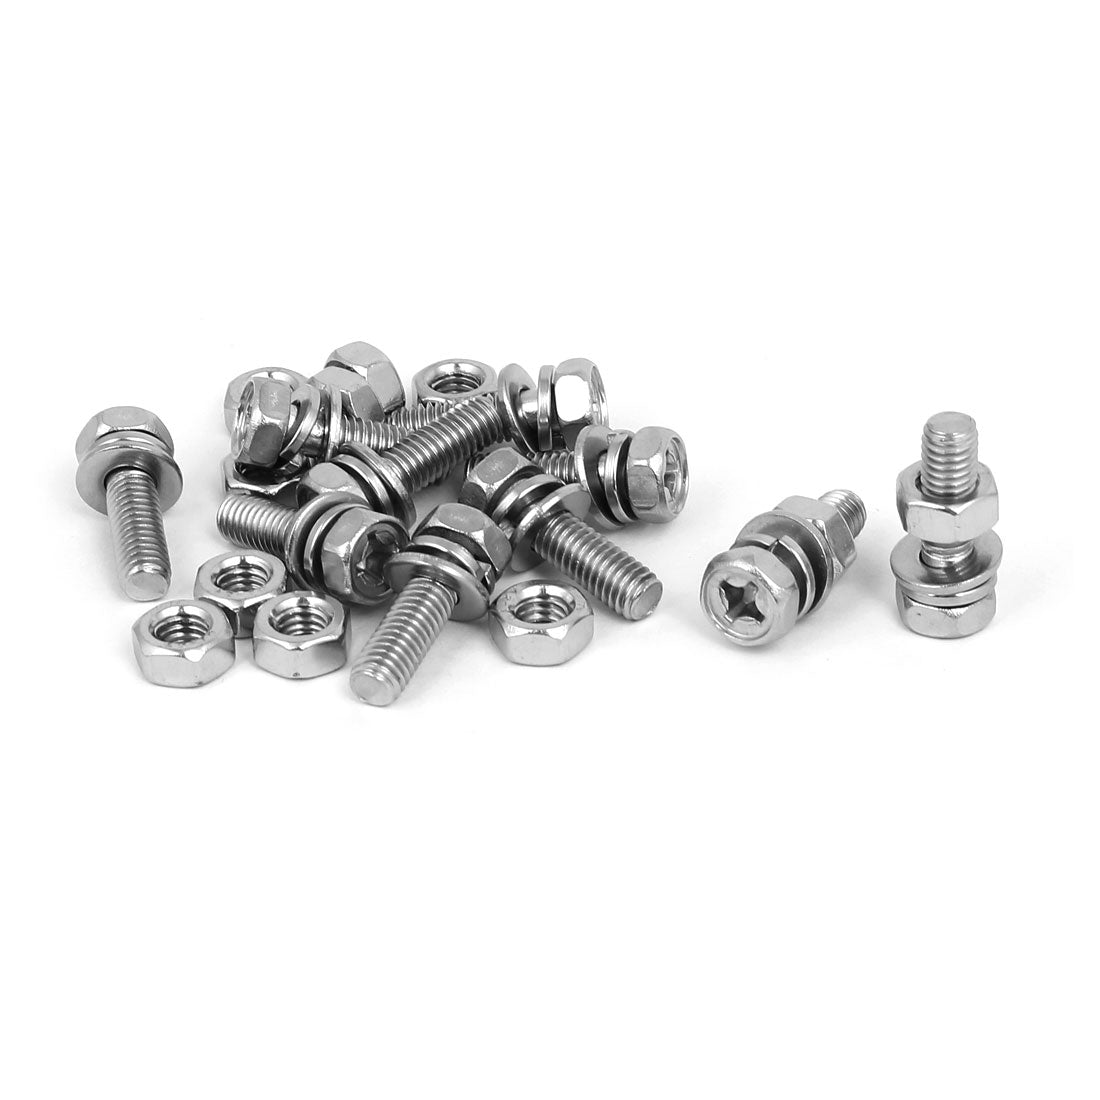 uxcell Uxcell M6 x 20mm 304 Stainless Steel Phillips Hex Head Bolts Nuts w Washers 10 Sets